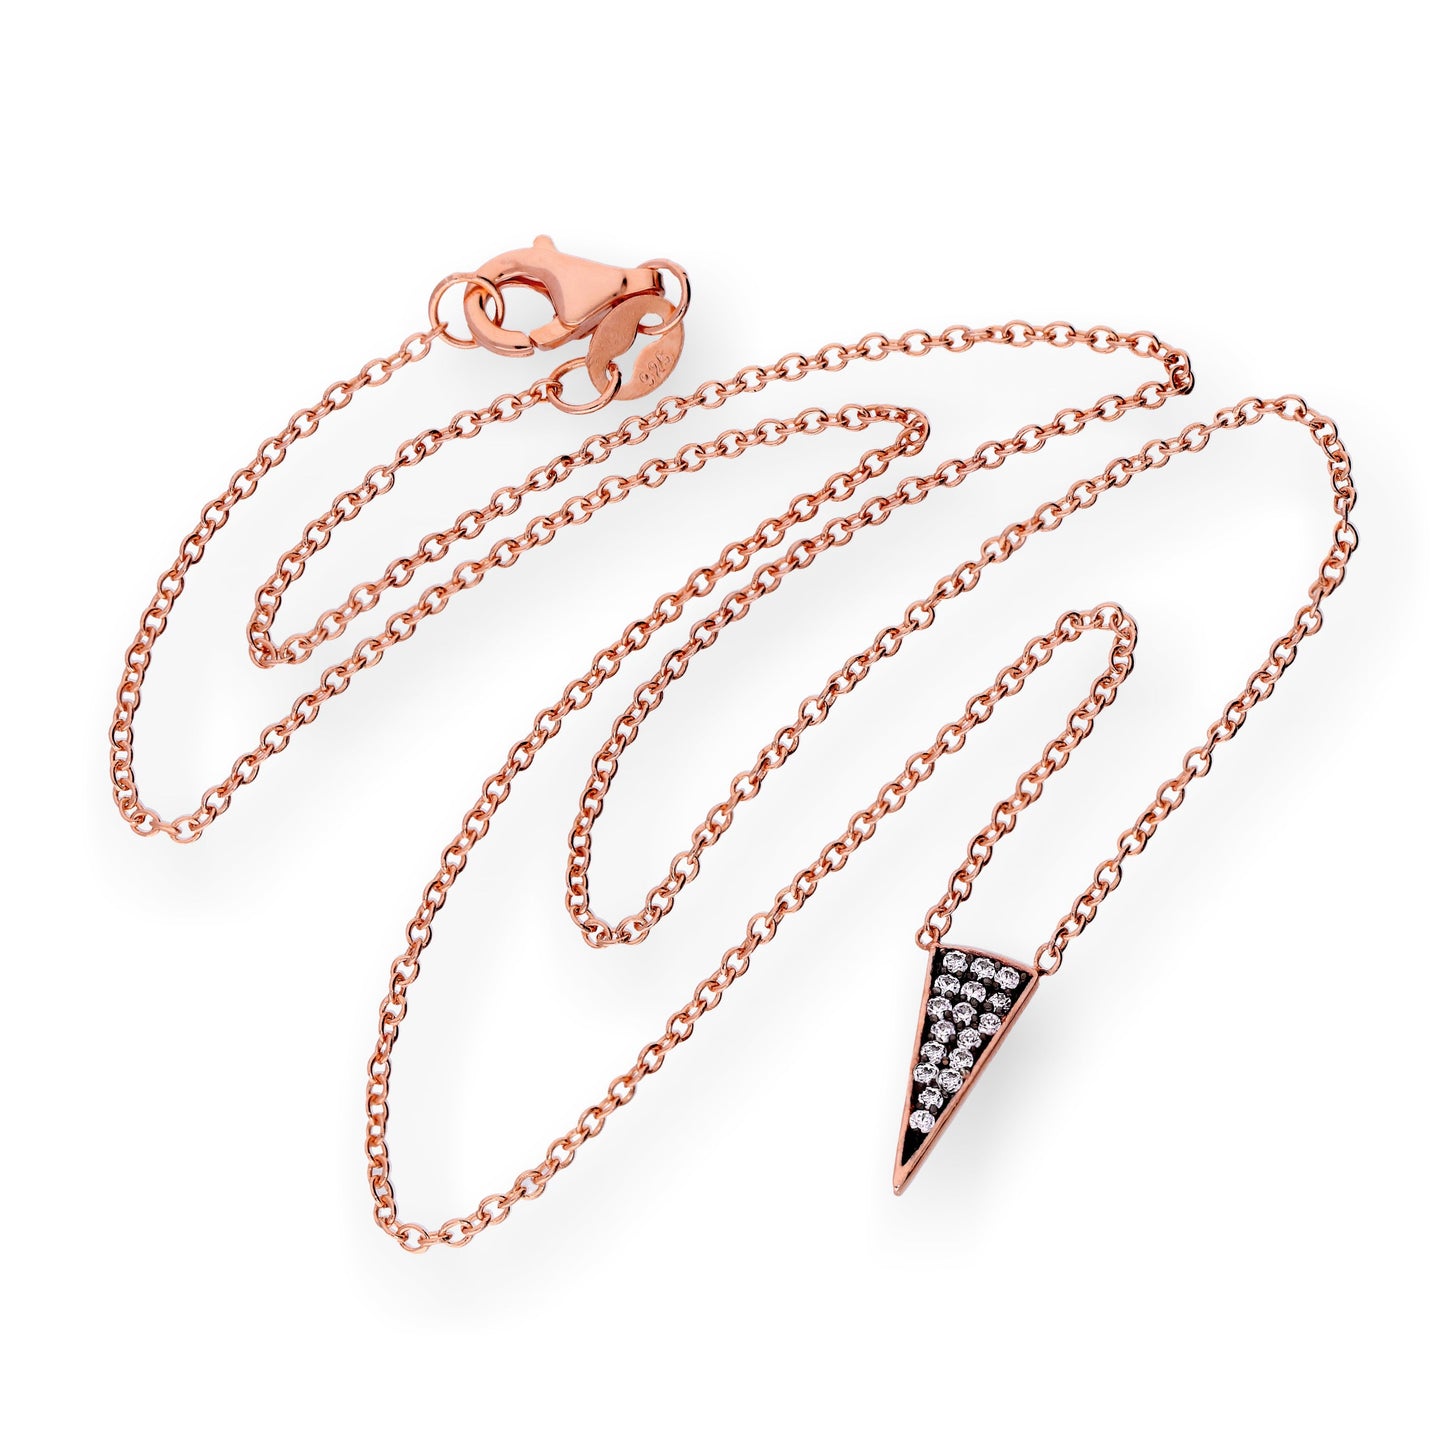 Rose Gold Plated Sterling Silver & CZ Crystal Spike Triangle 16 Inch Necklace